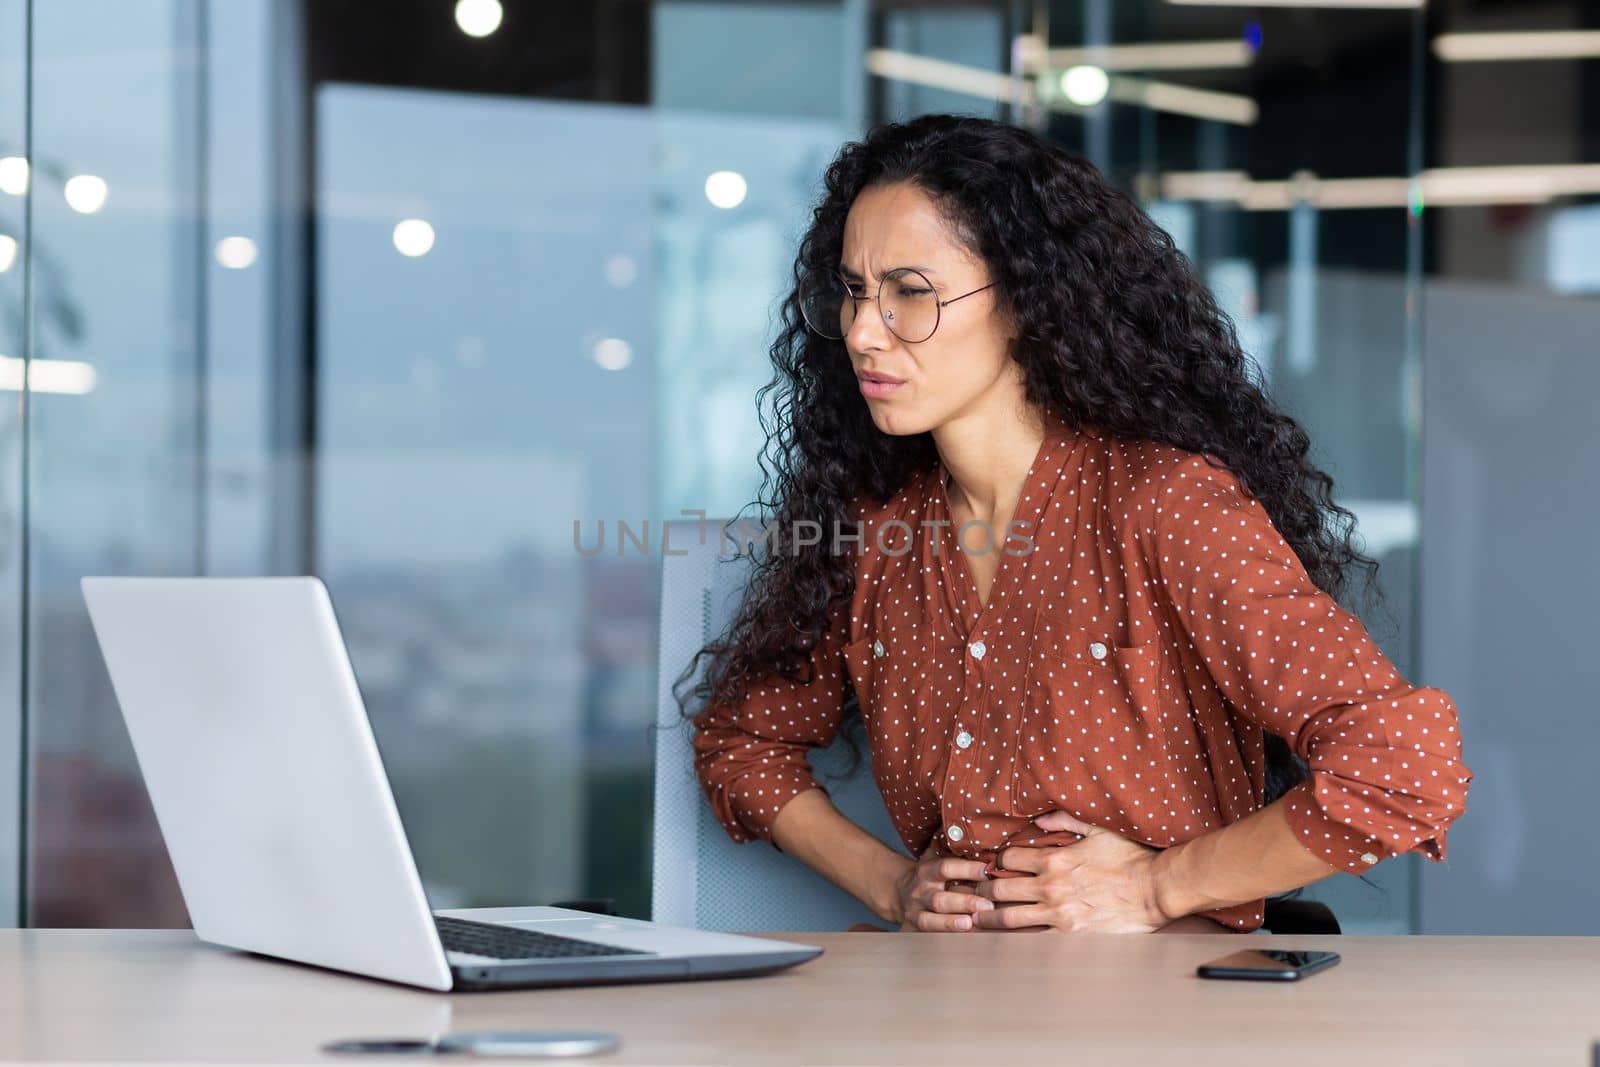 Sick business woman working inside office using laptop while sitting at table, Hispanic woman has severe stomach pain.